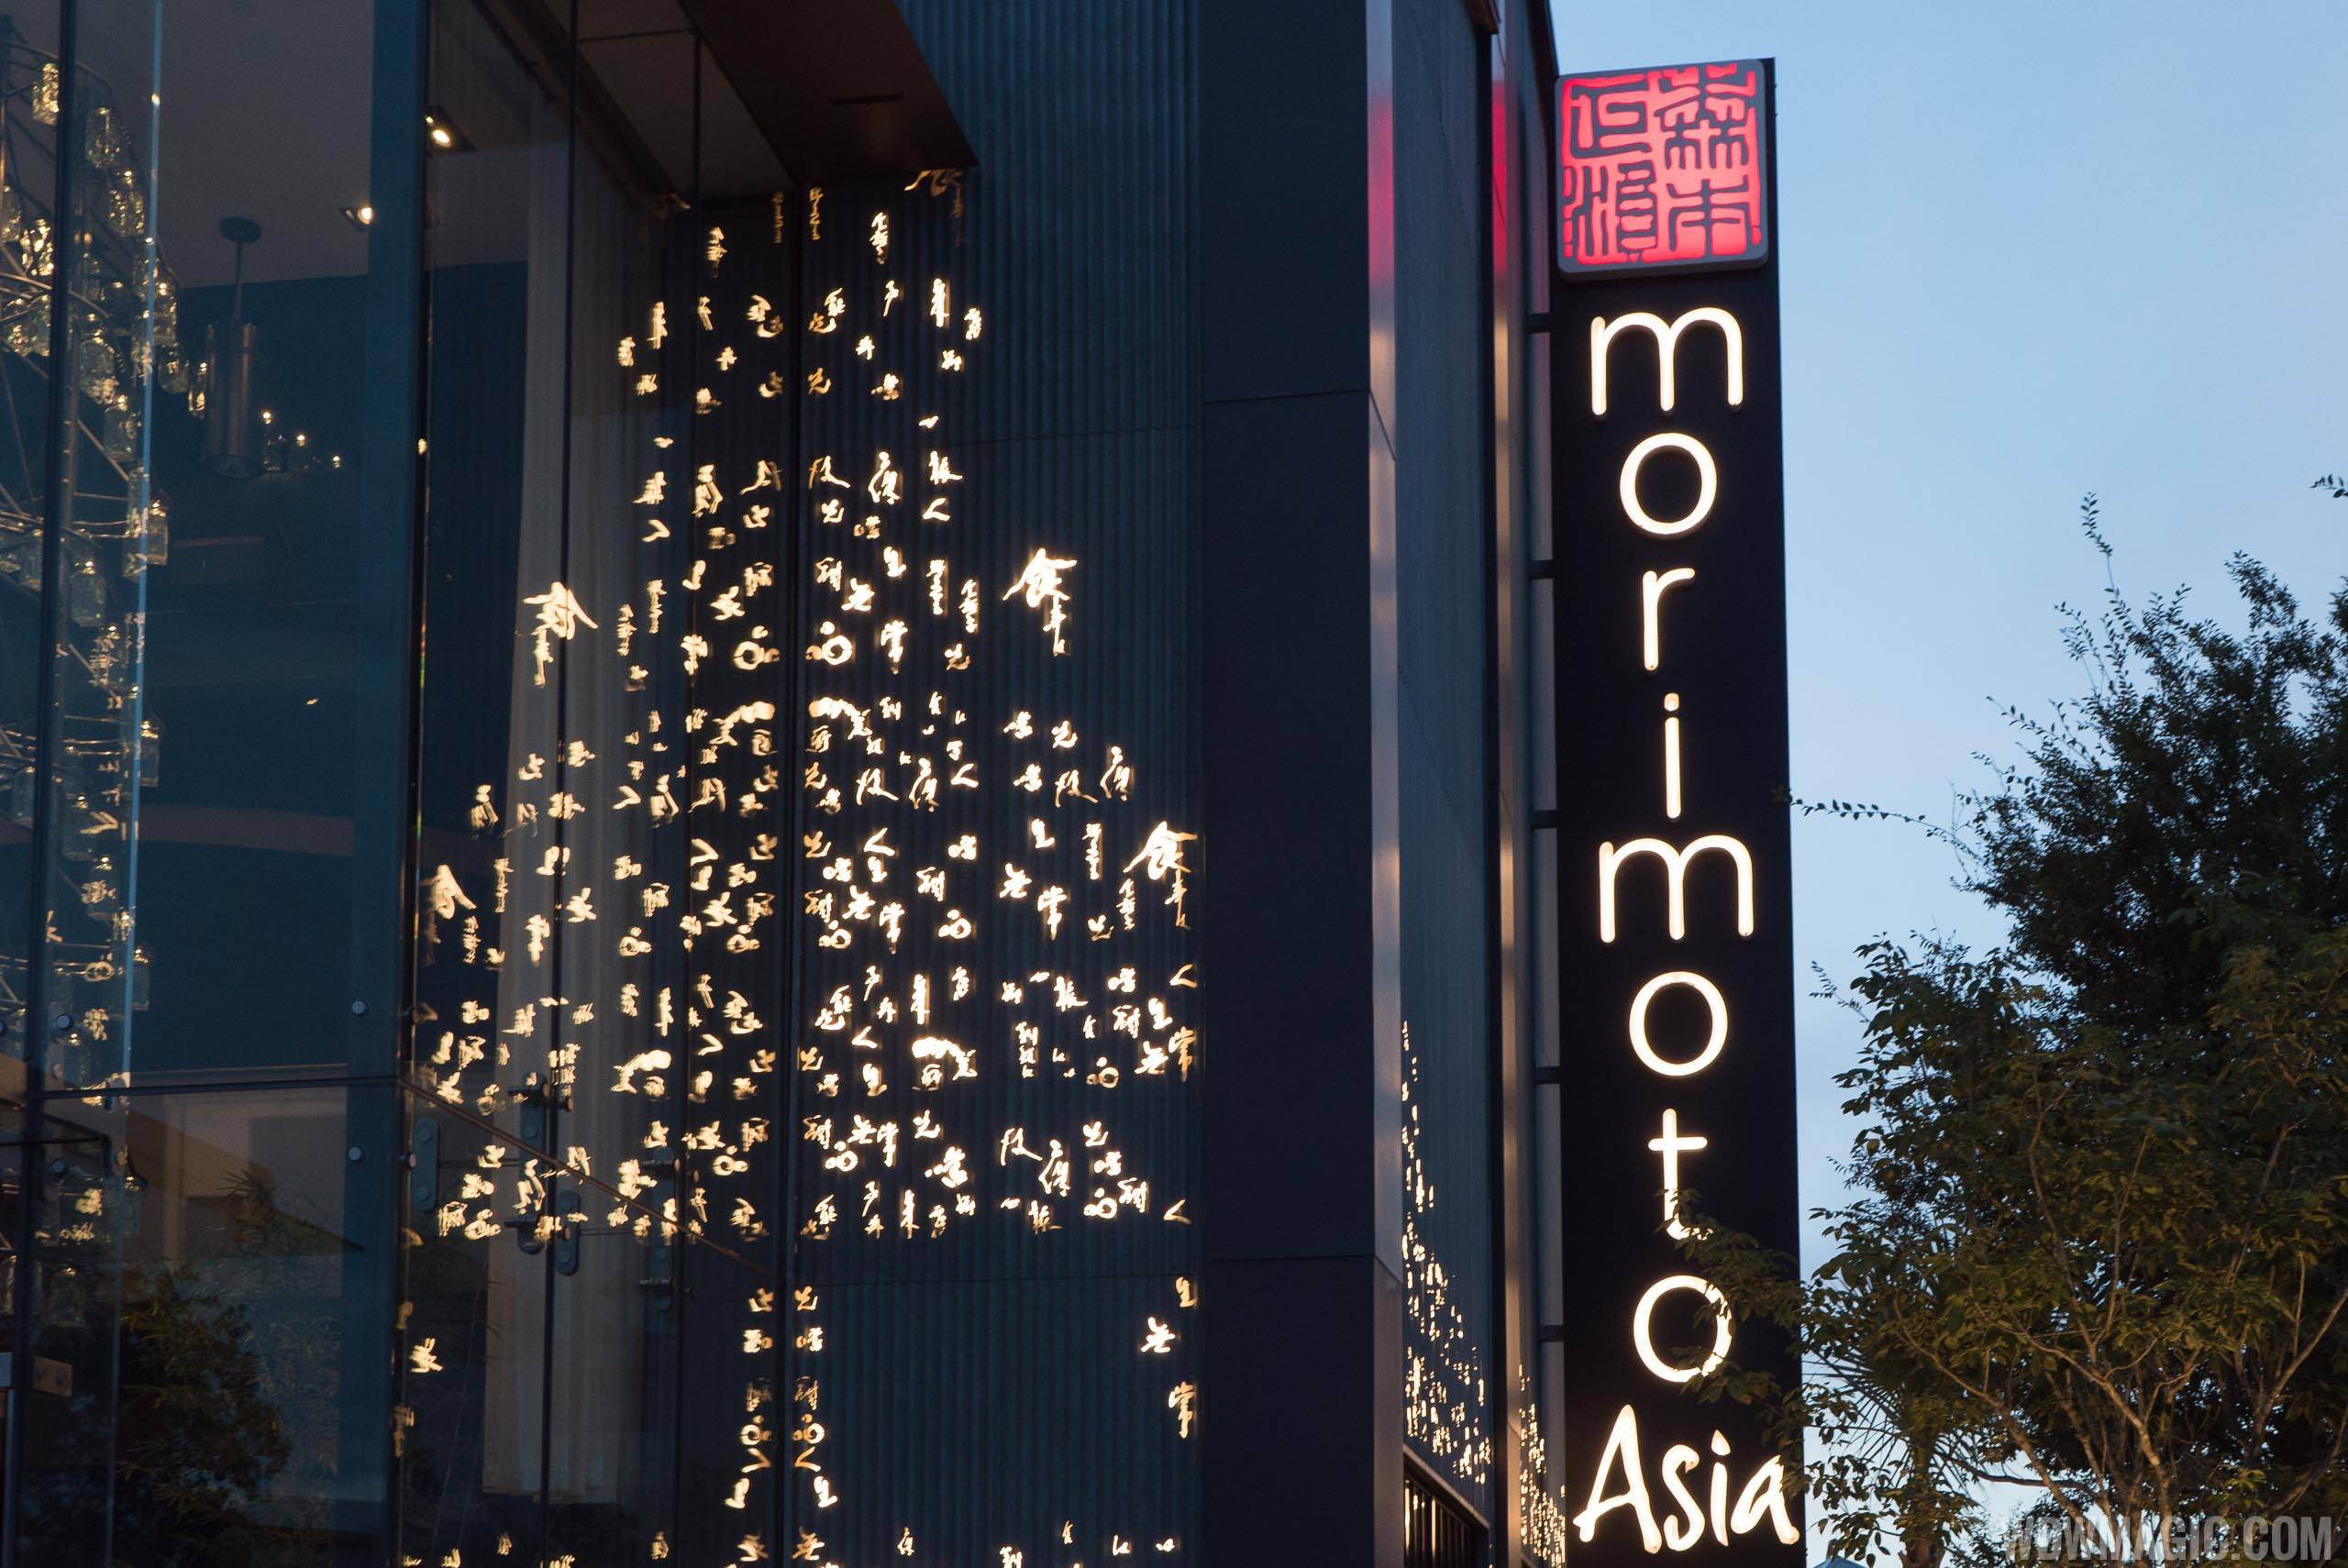 12 Beers of Christmas event coming to Morimoto Asia at Disney Springs